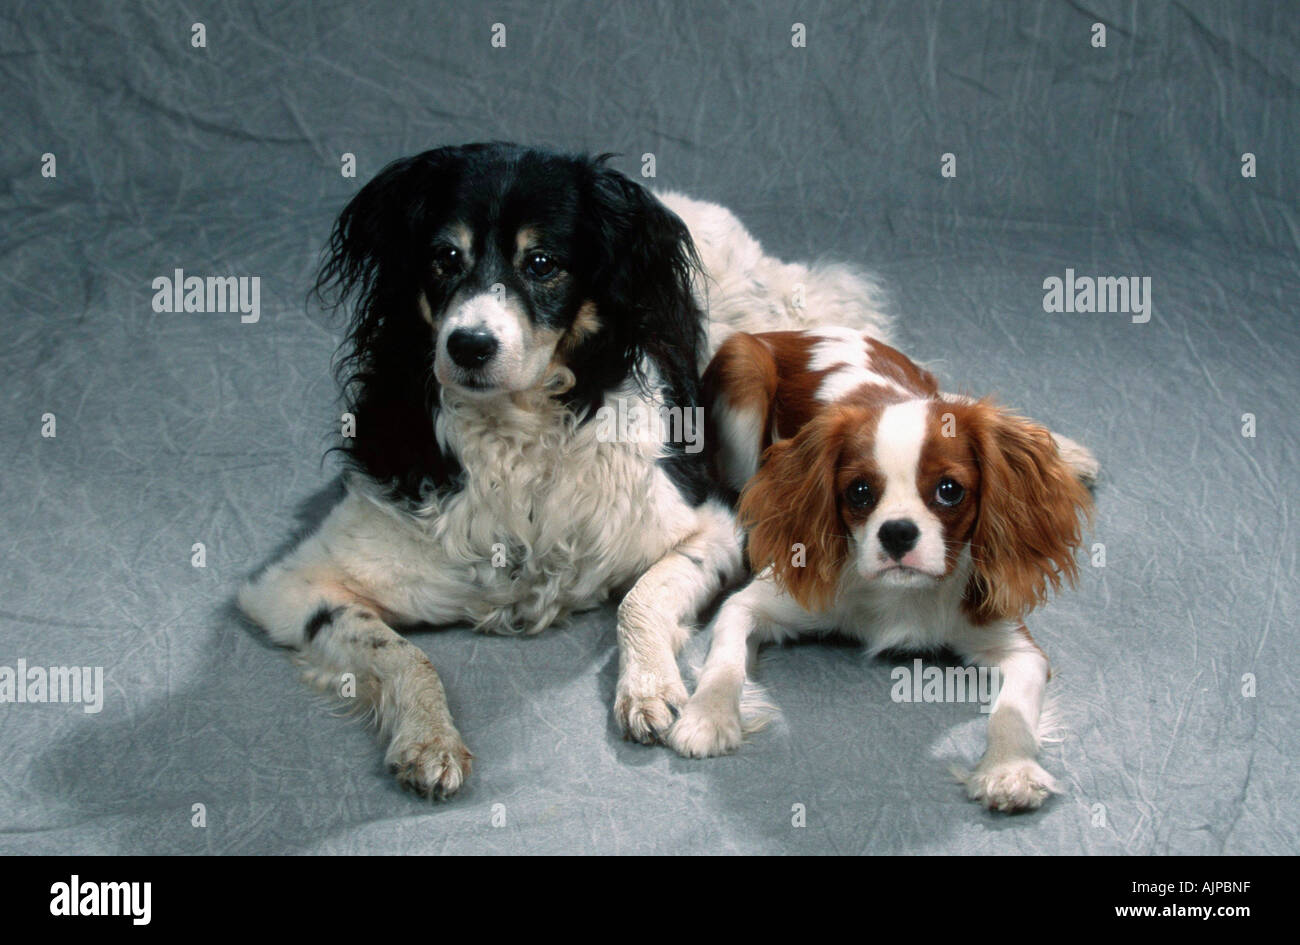 Mixed Breed Dog and Cavalier King Charles Spaniel Stock Photo - Alamy